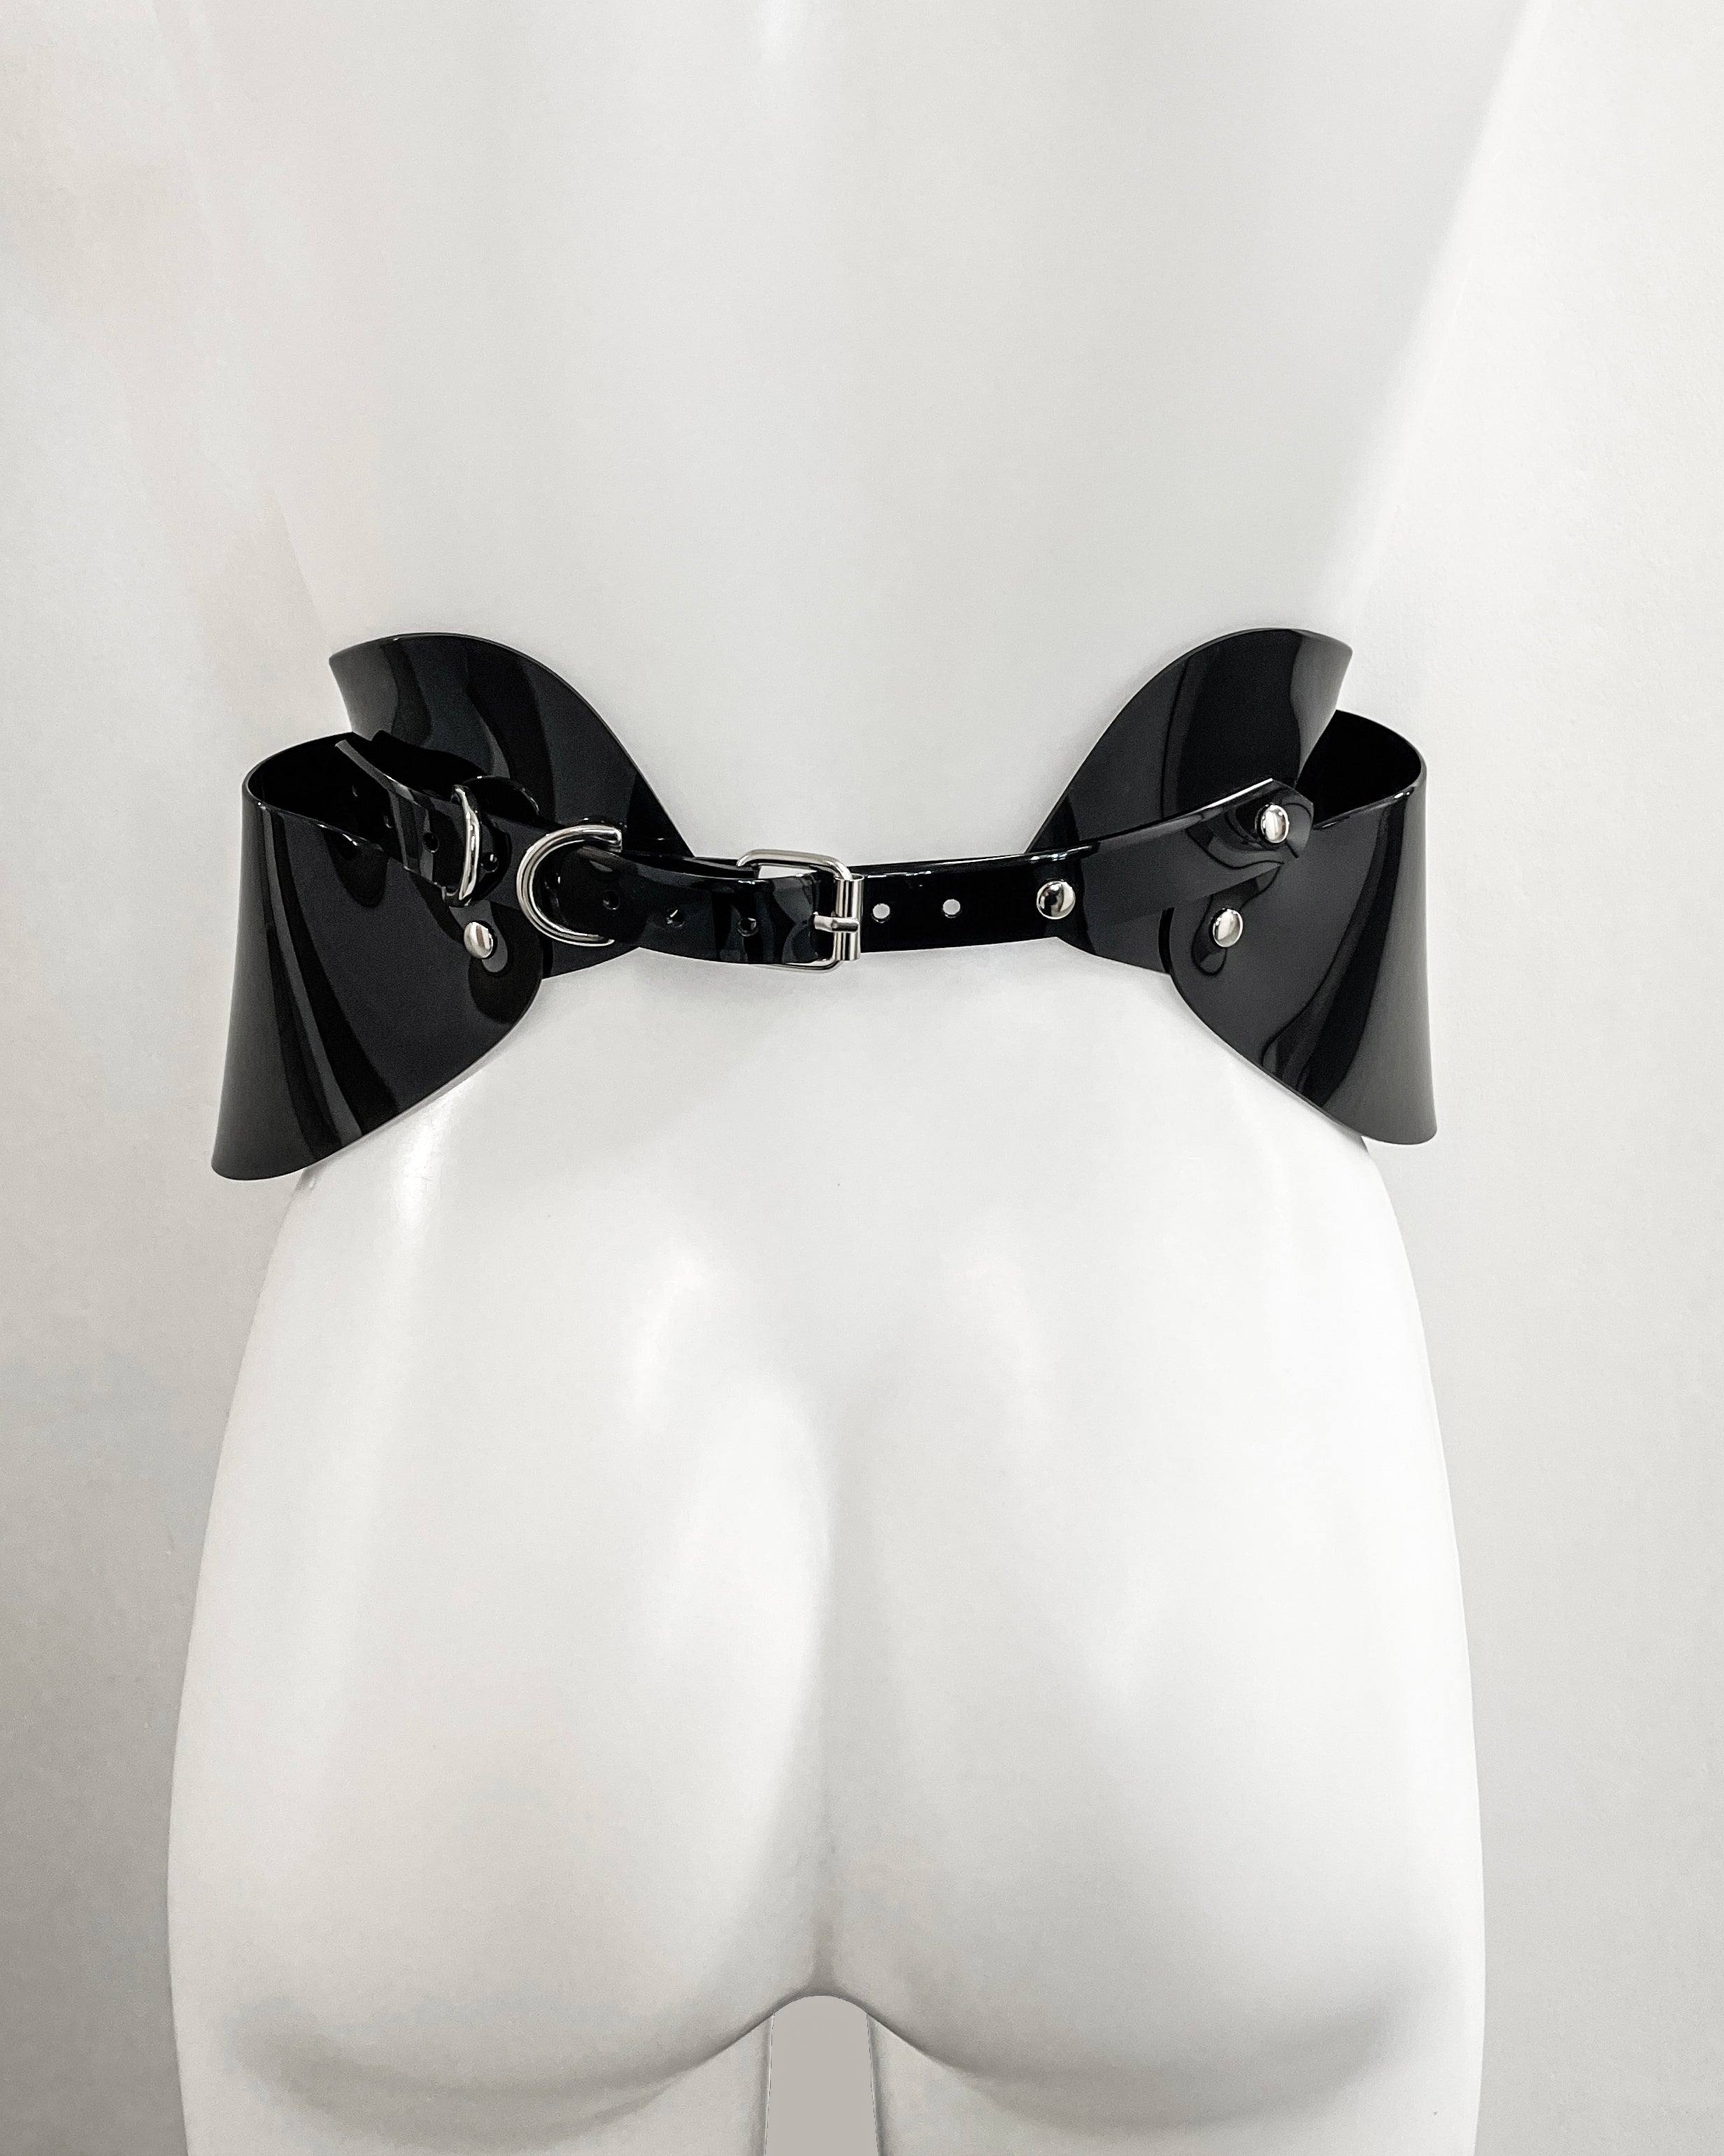 Jivomir Domoustchiev vegan vinyl pvc fashion wearable sculpture belt hand crafted to order only in East London Atelier independent luxury brand